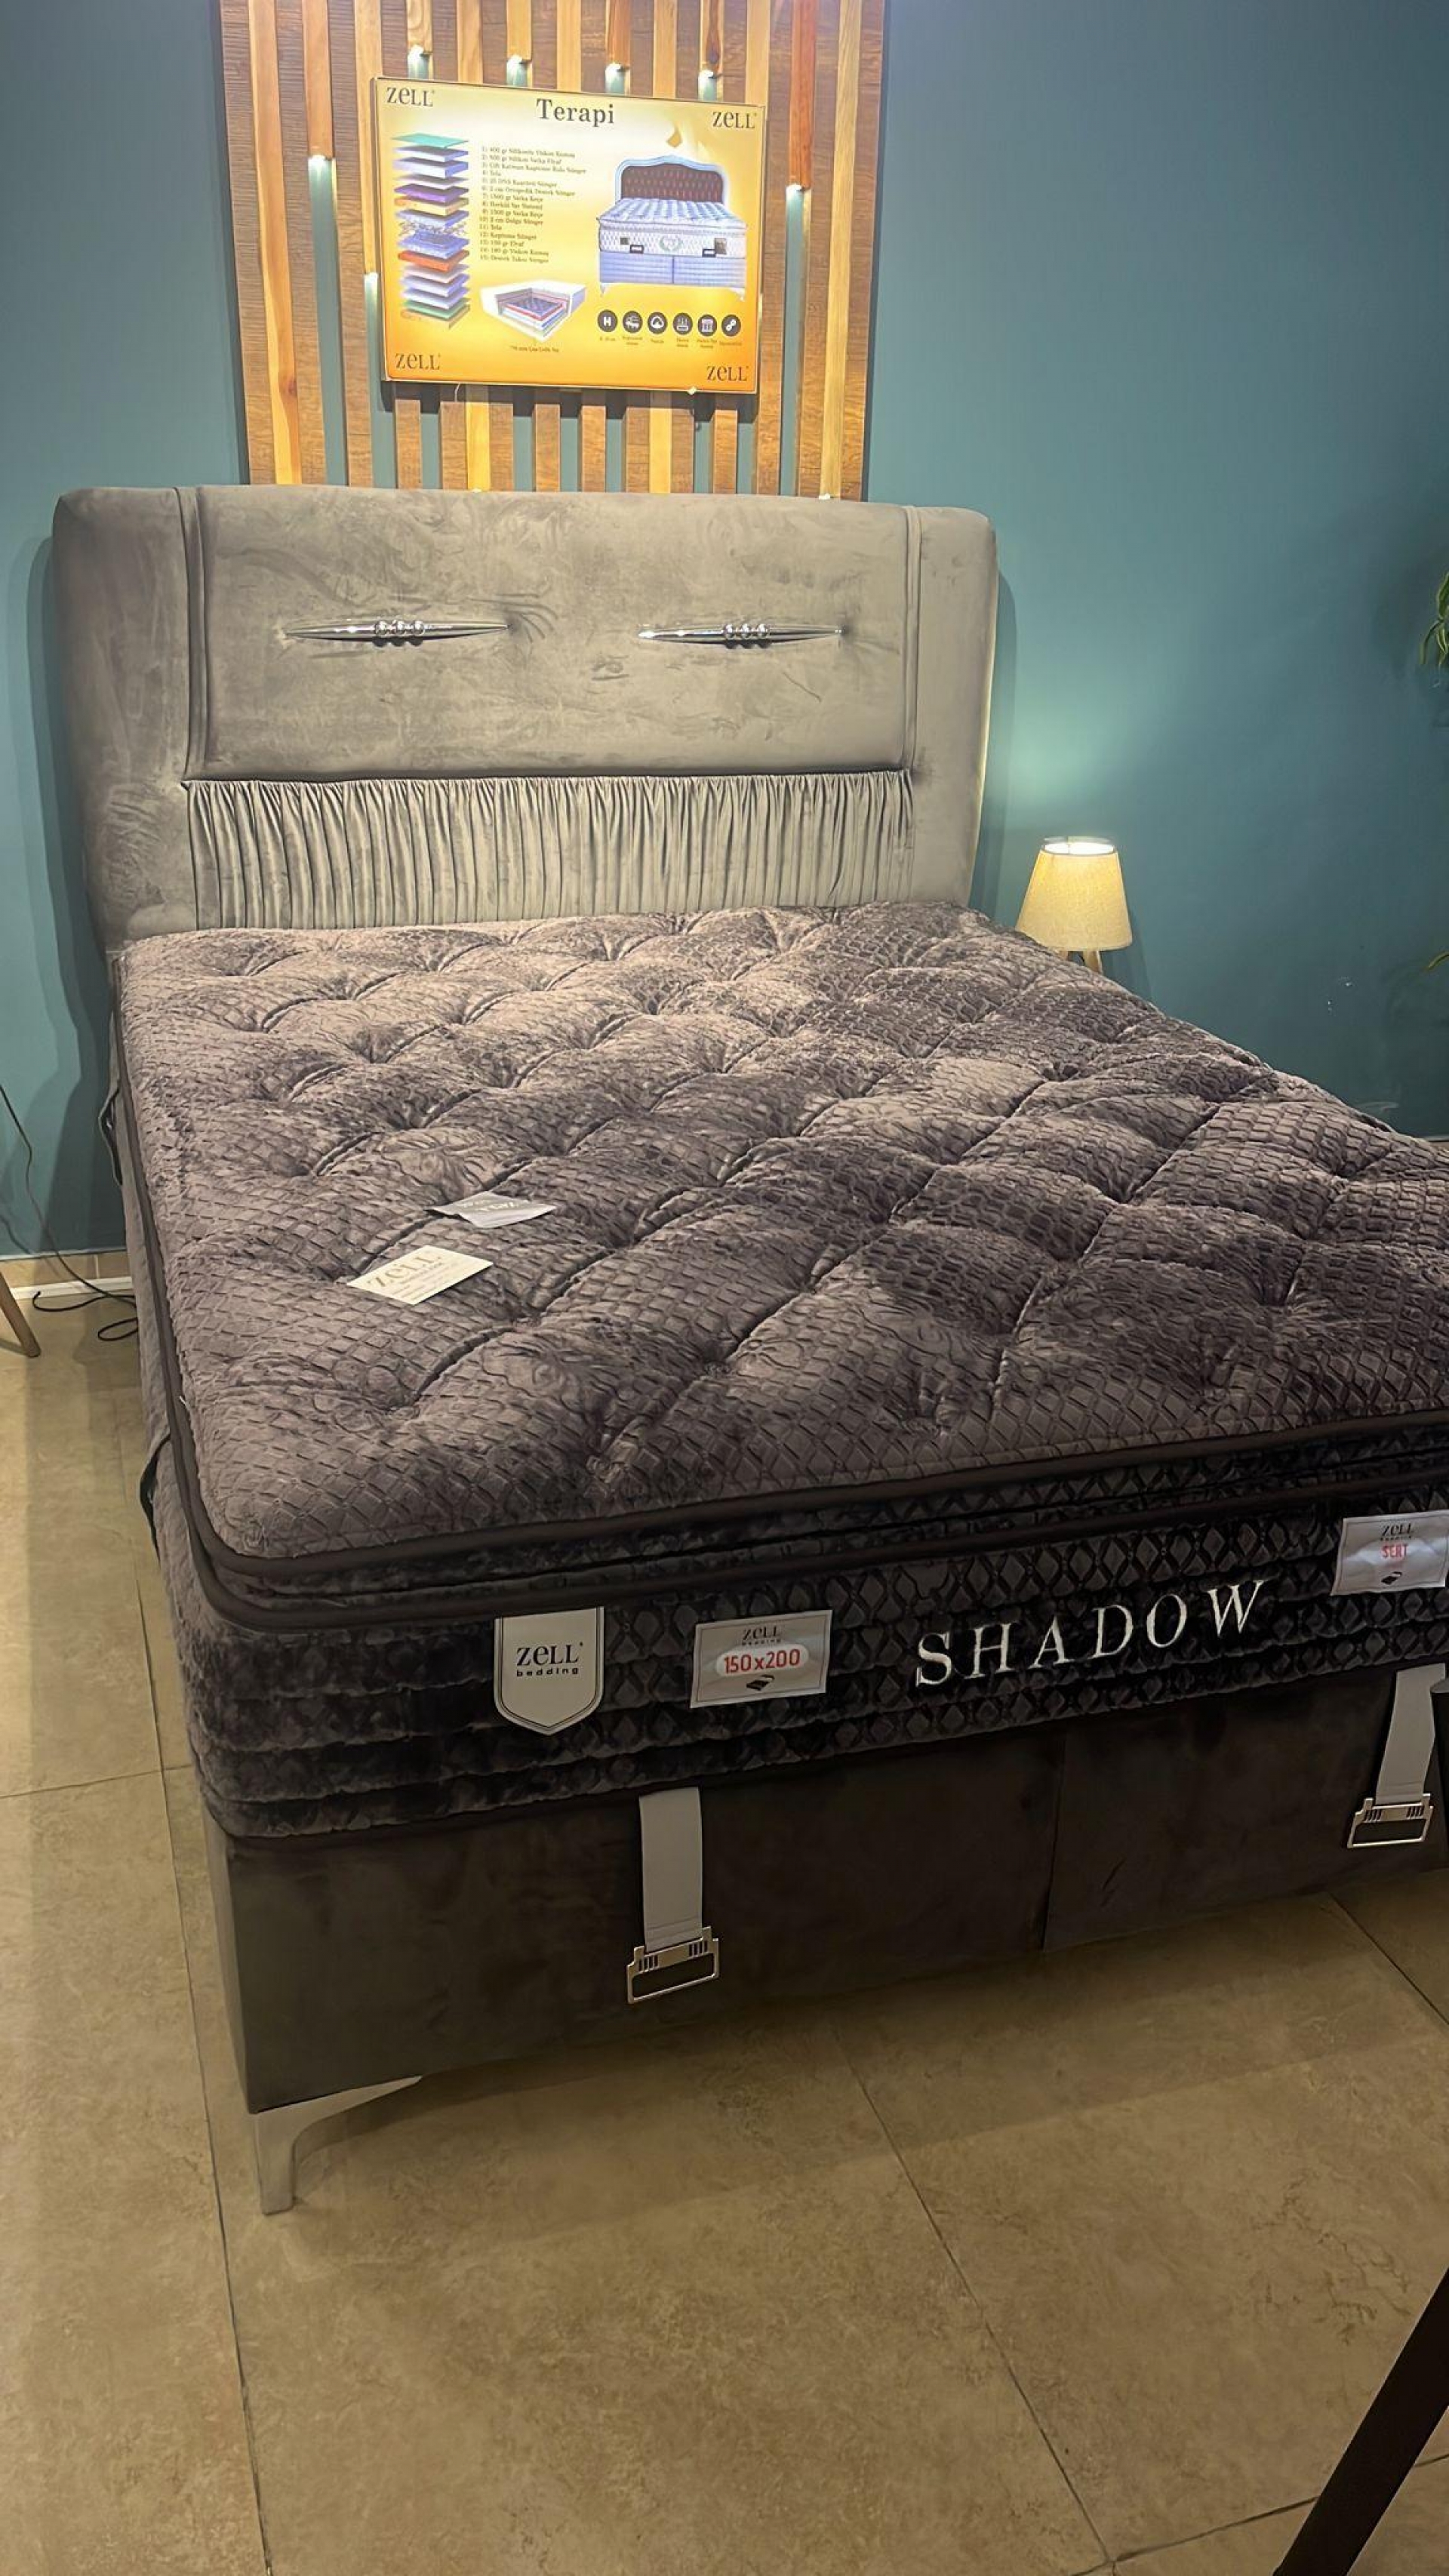 SHADOW BED